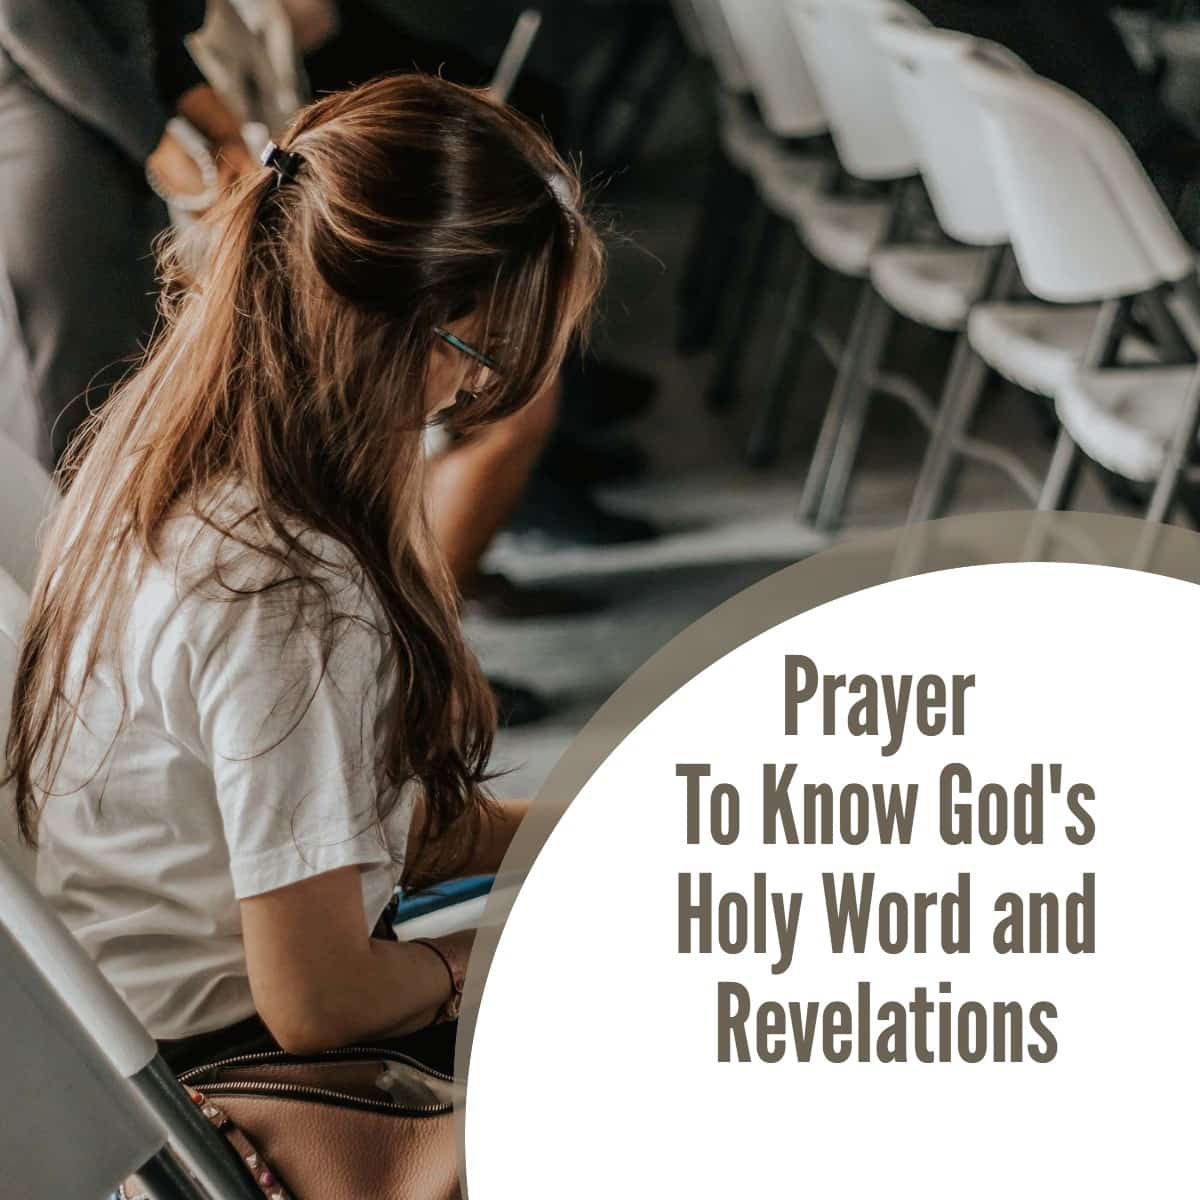 Prayer To Know God's Holy Word and Revelations